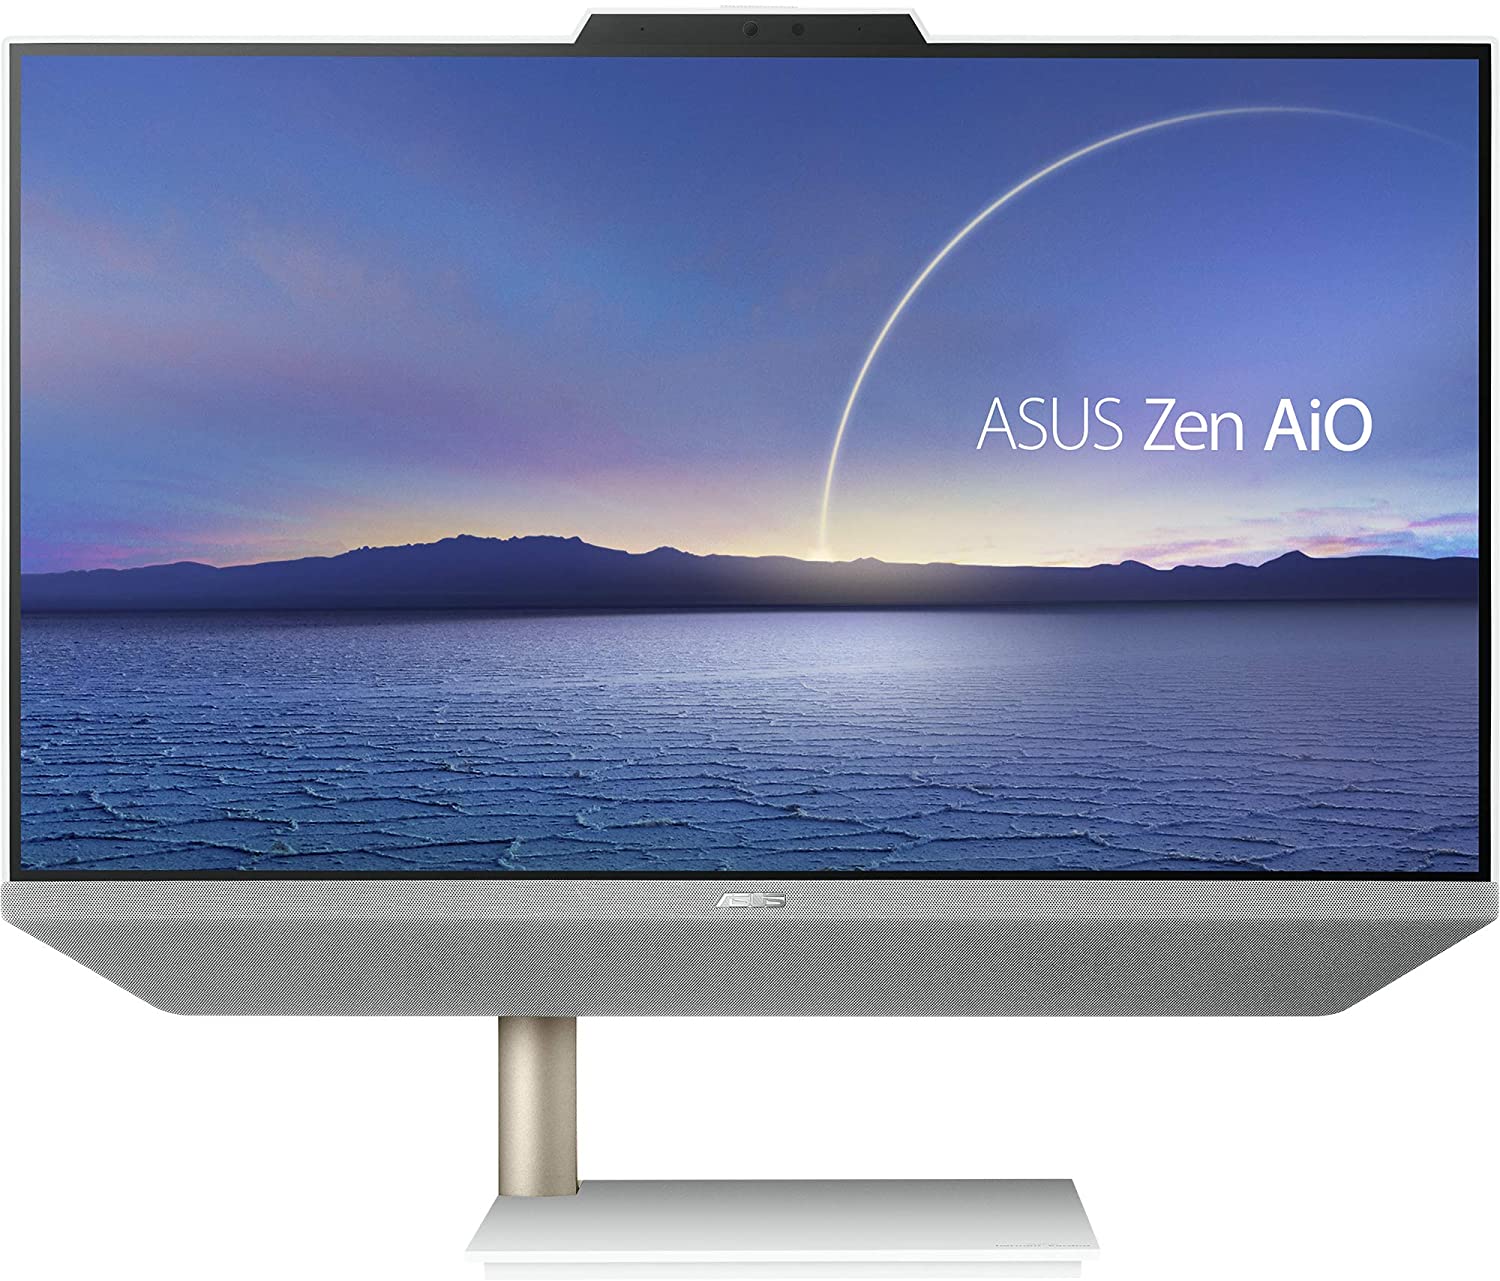 Pc All-in-one - ASUS Zen AiO